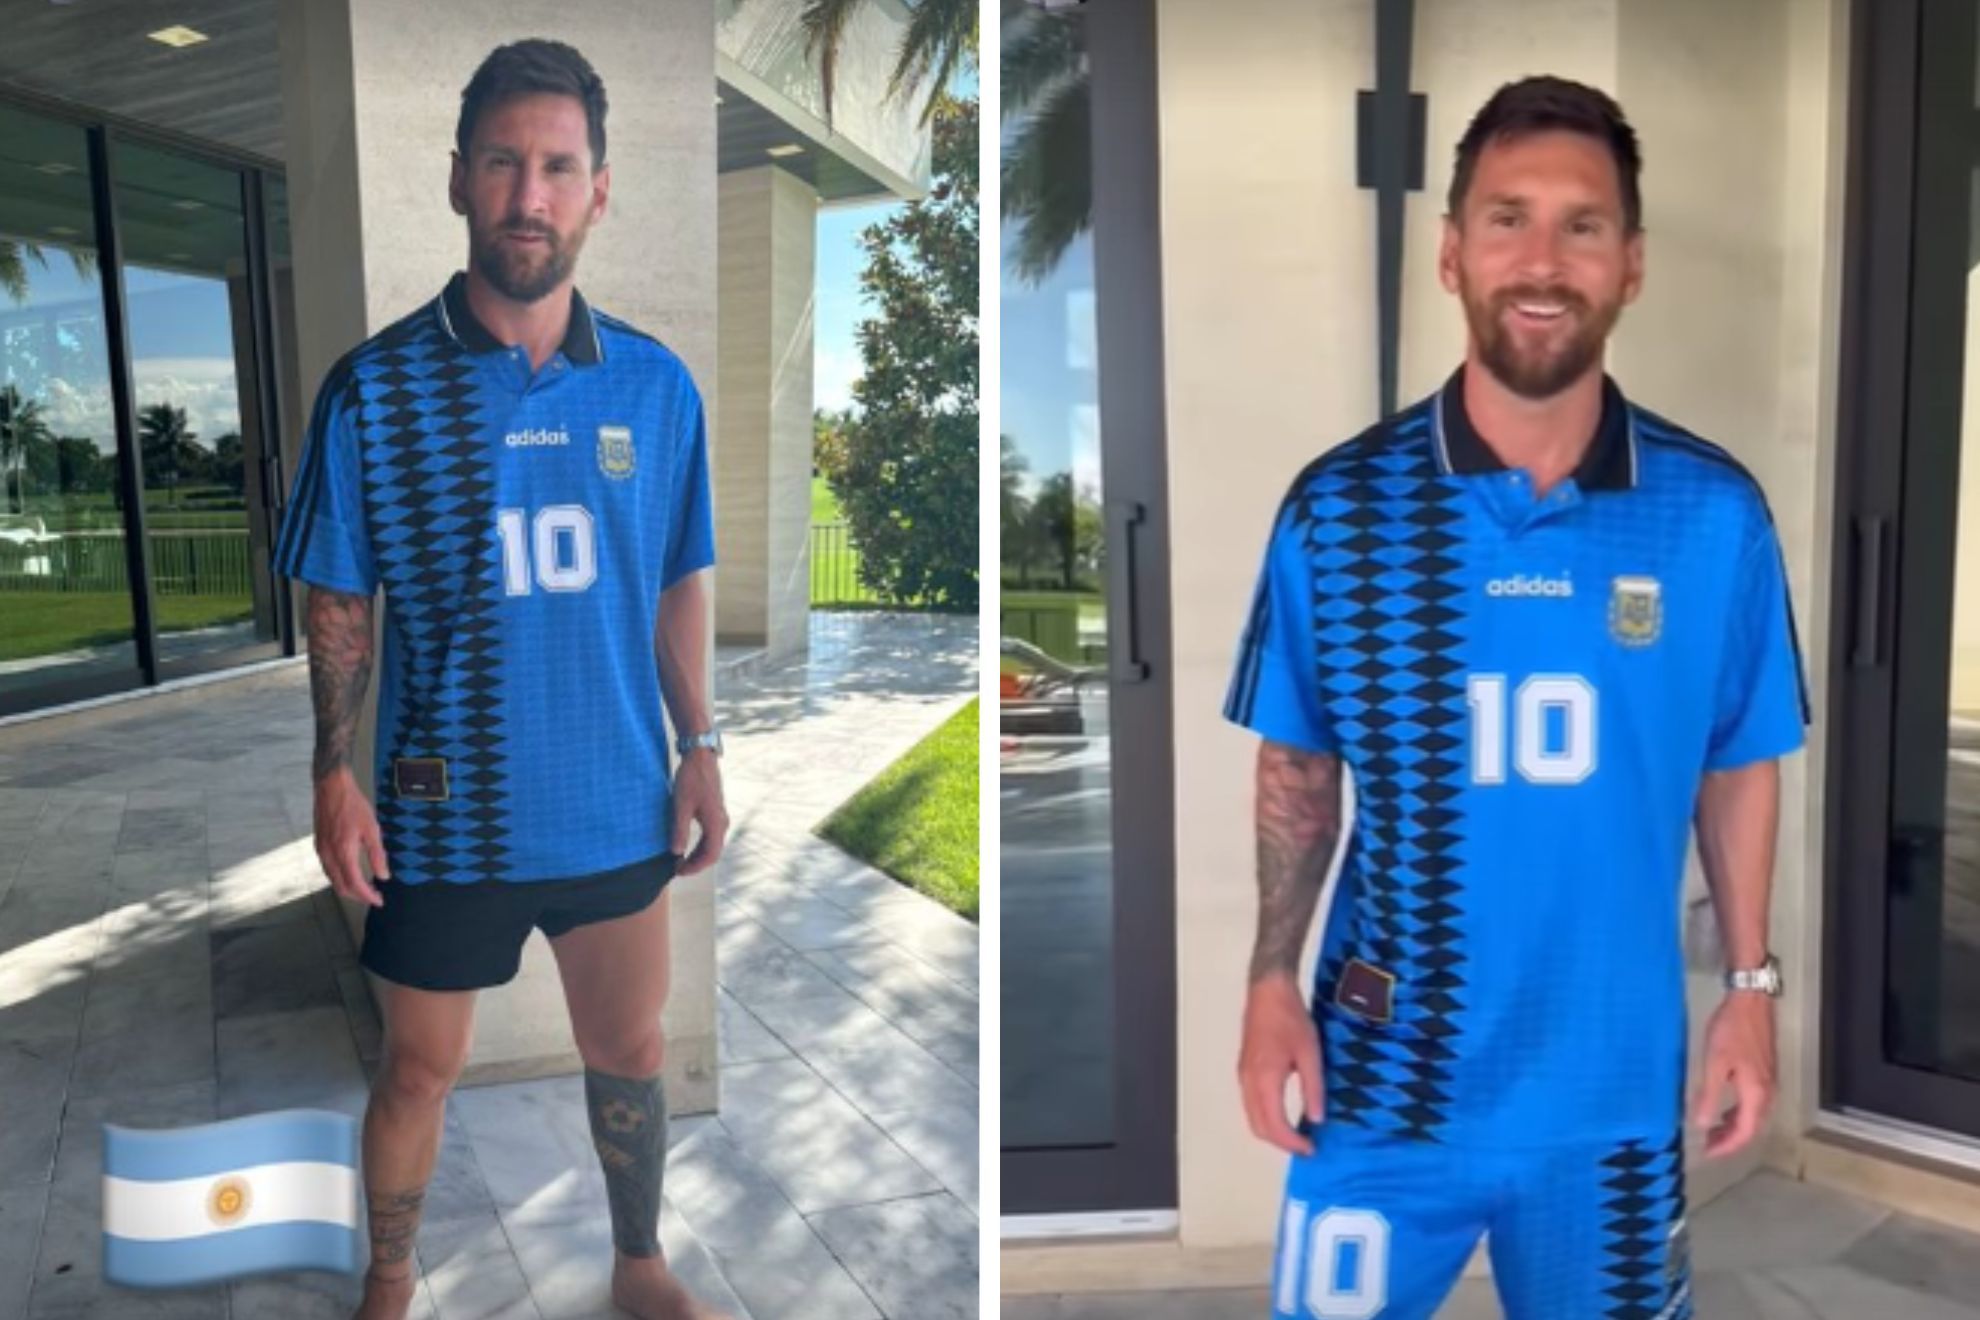 messi fifa world cup jersey